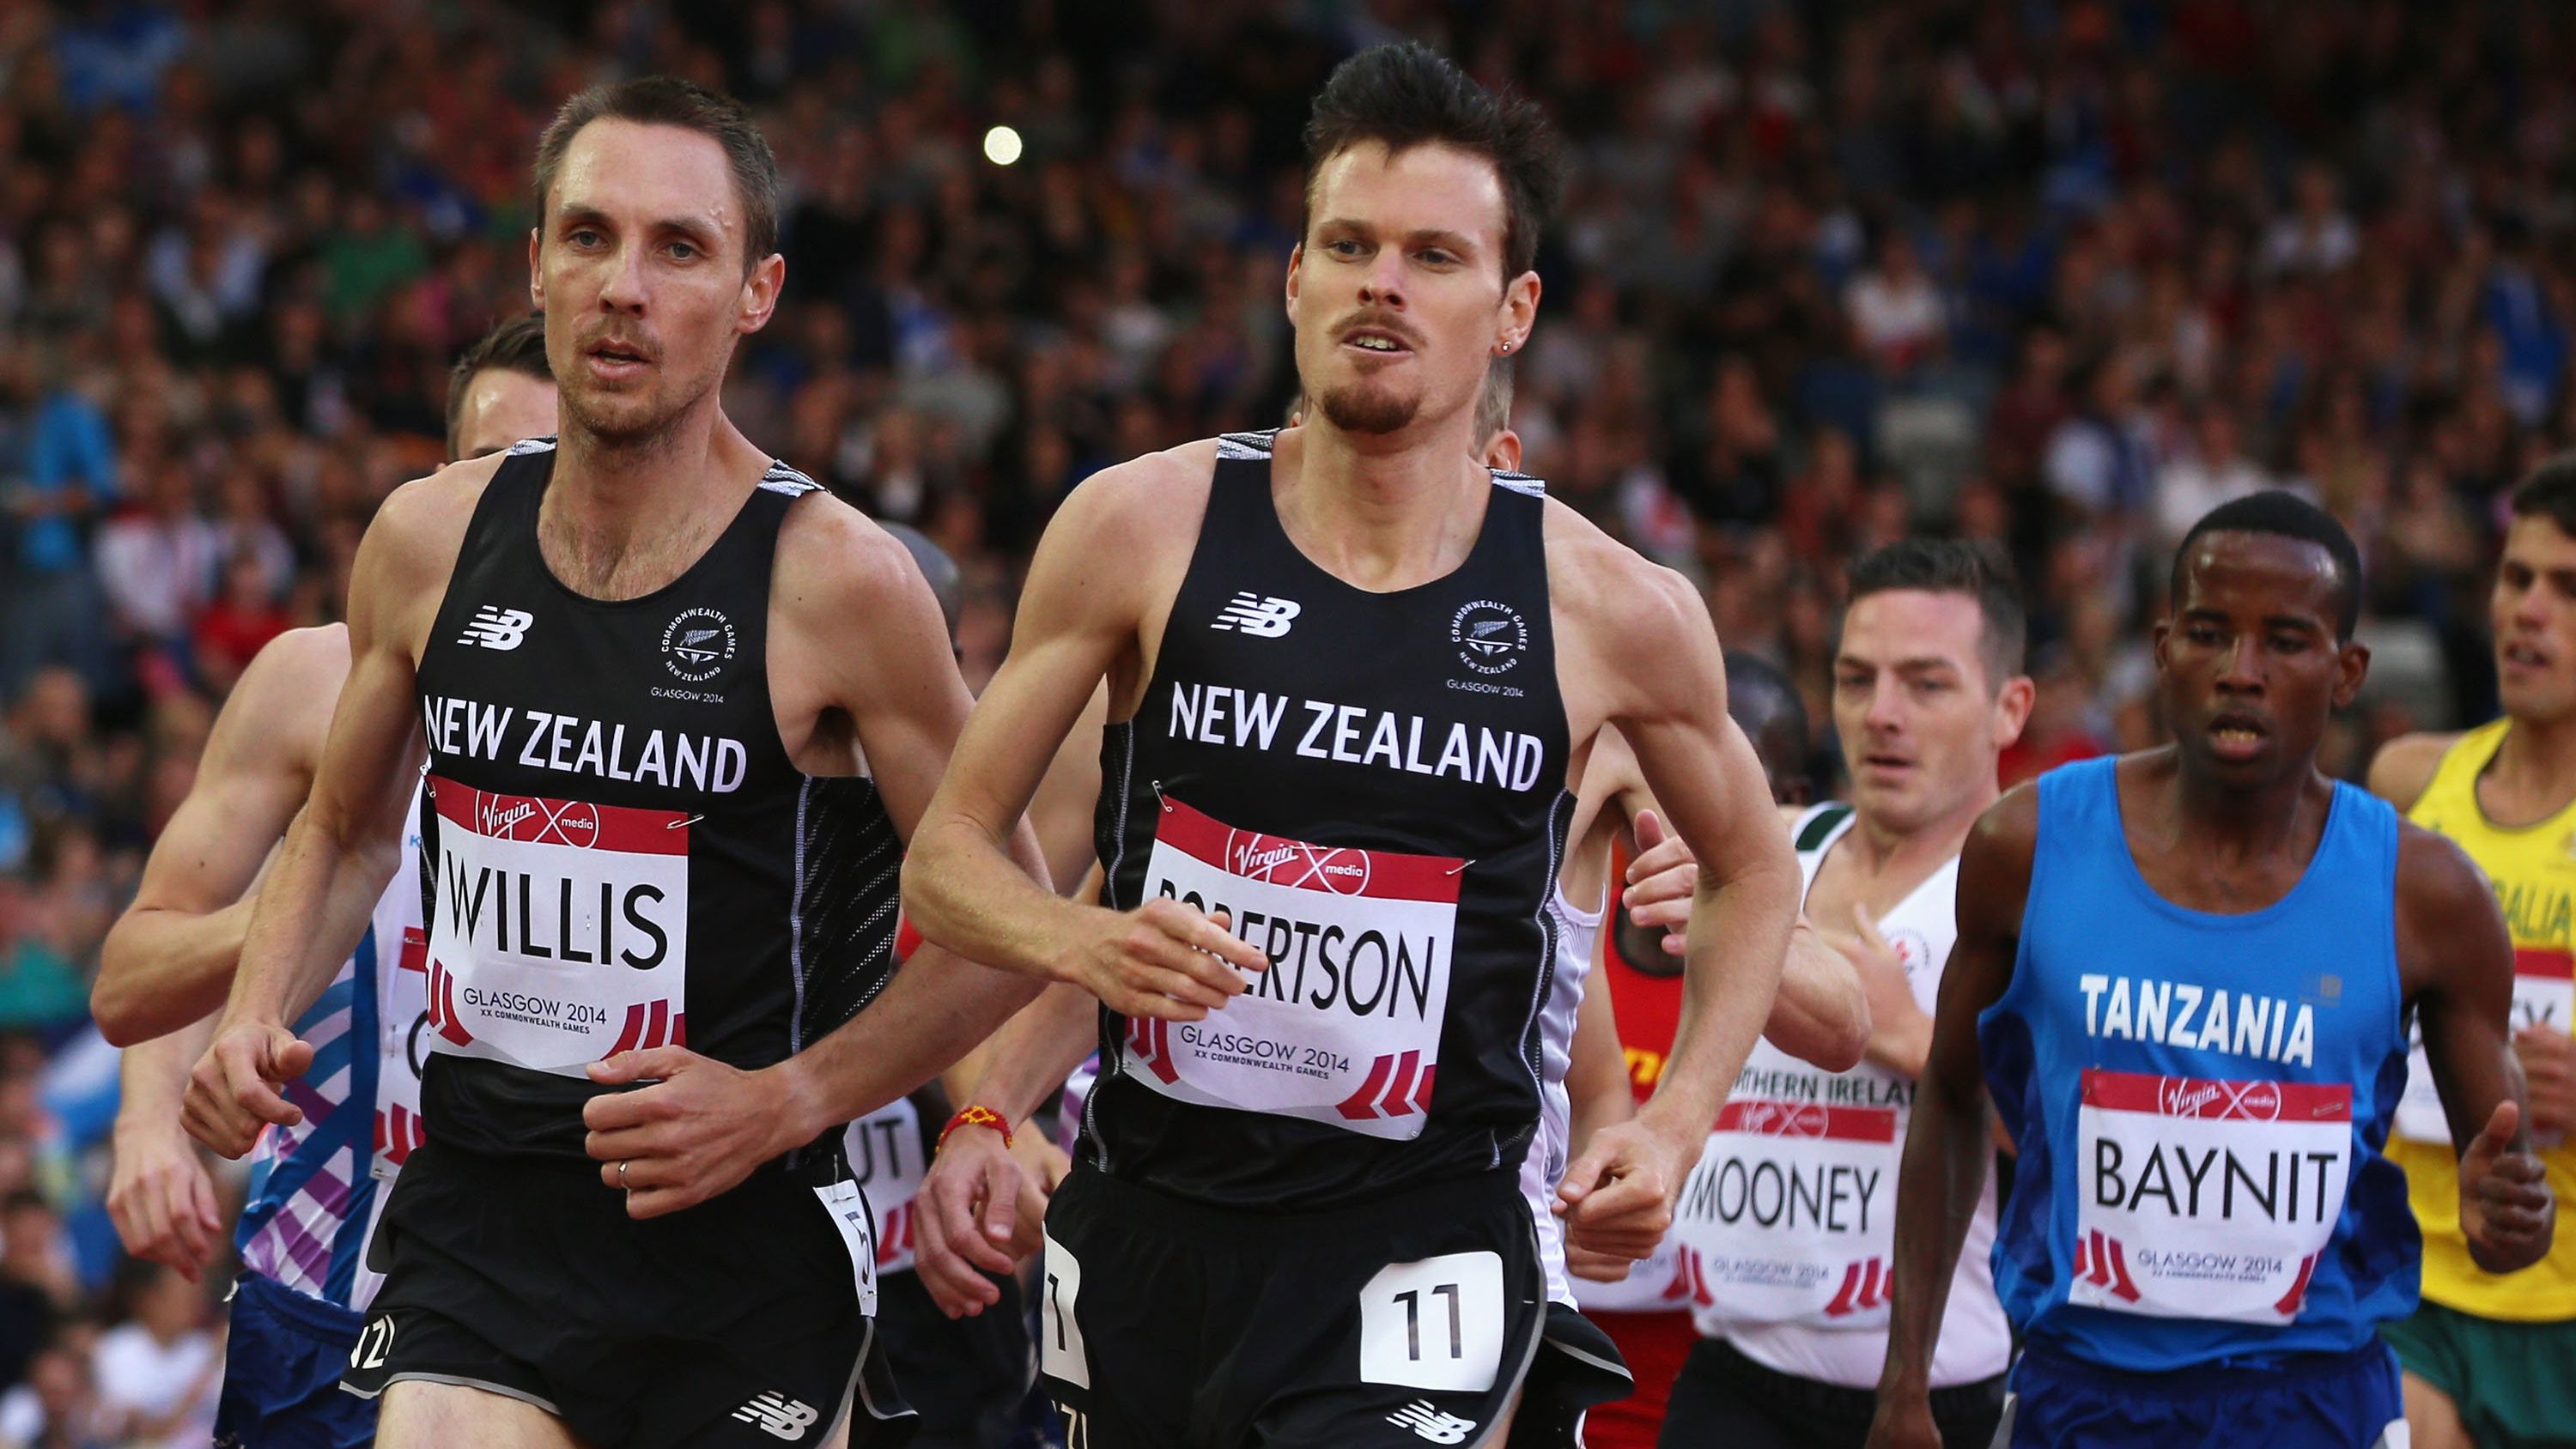 Zane Robertson (middle) runs with Nick Willis during the 2014 Commonwealth Games.